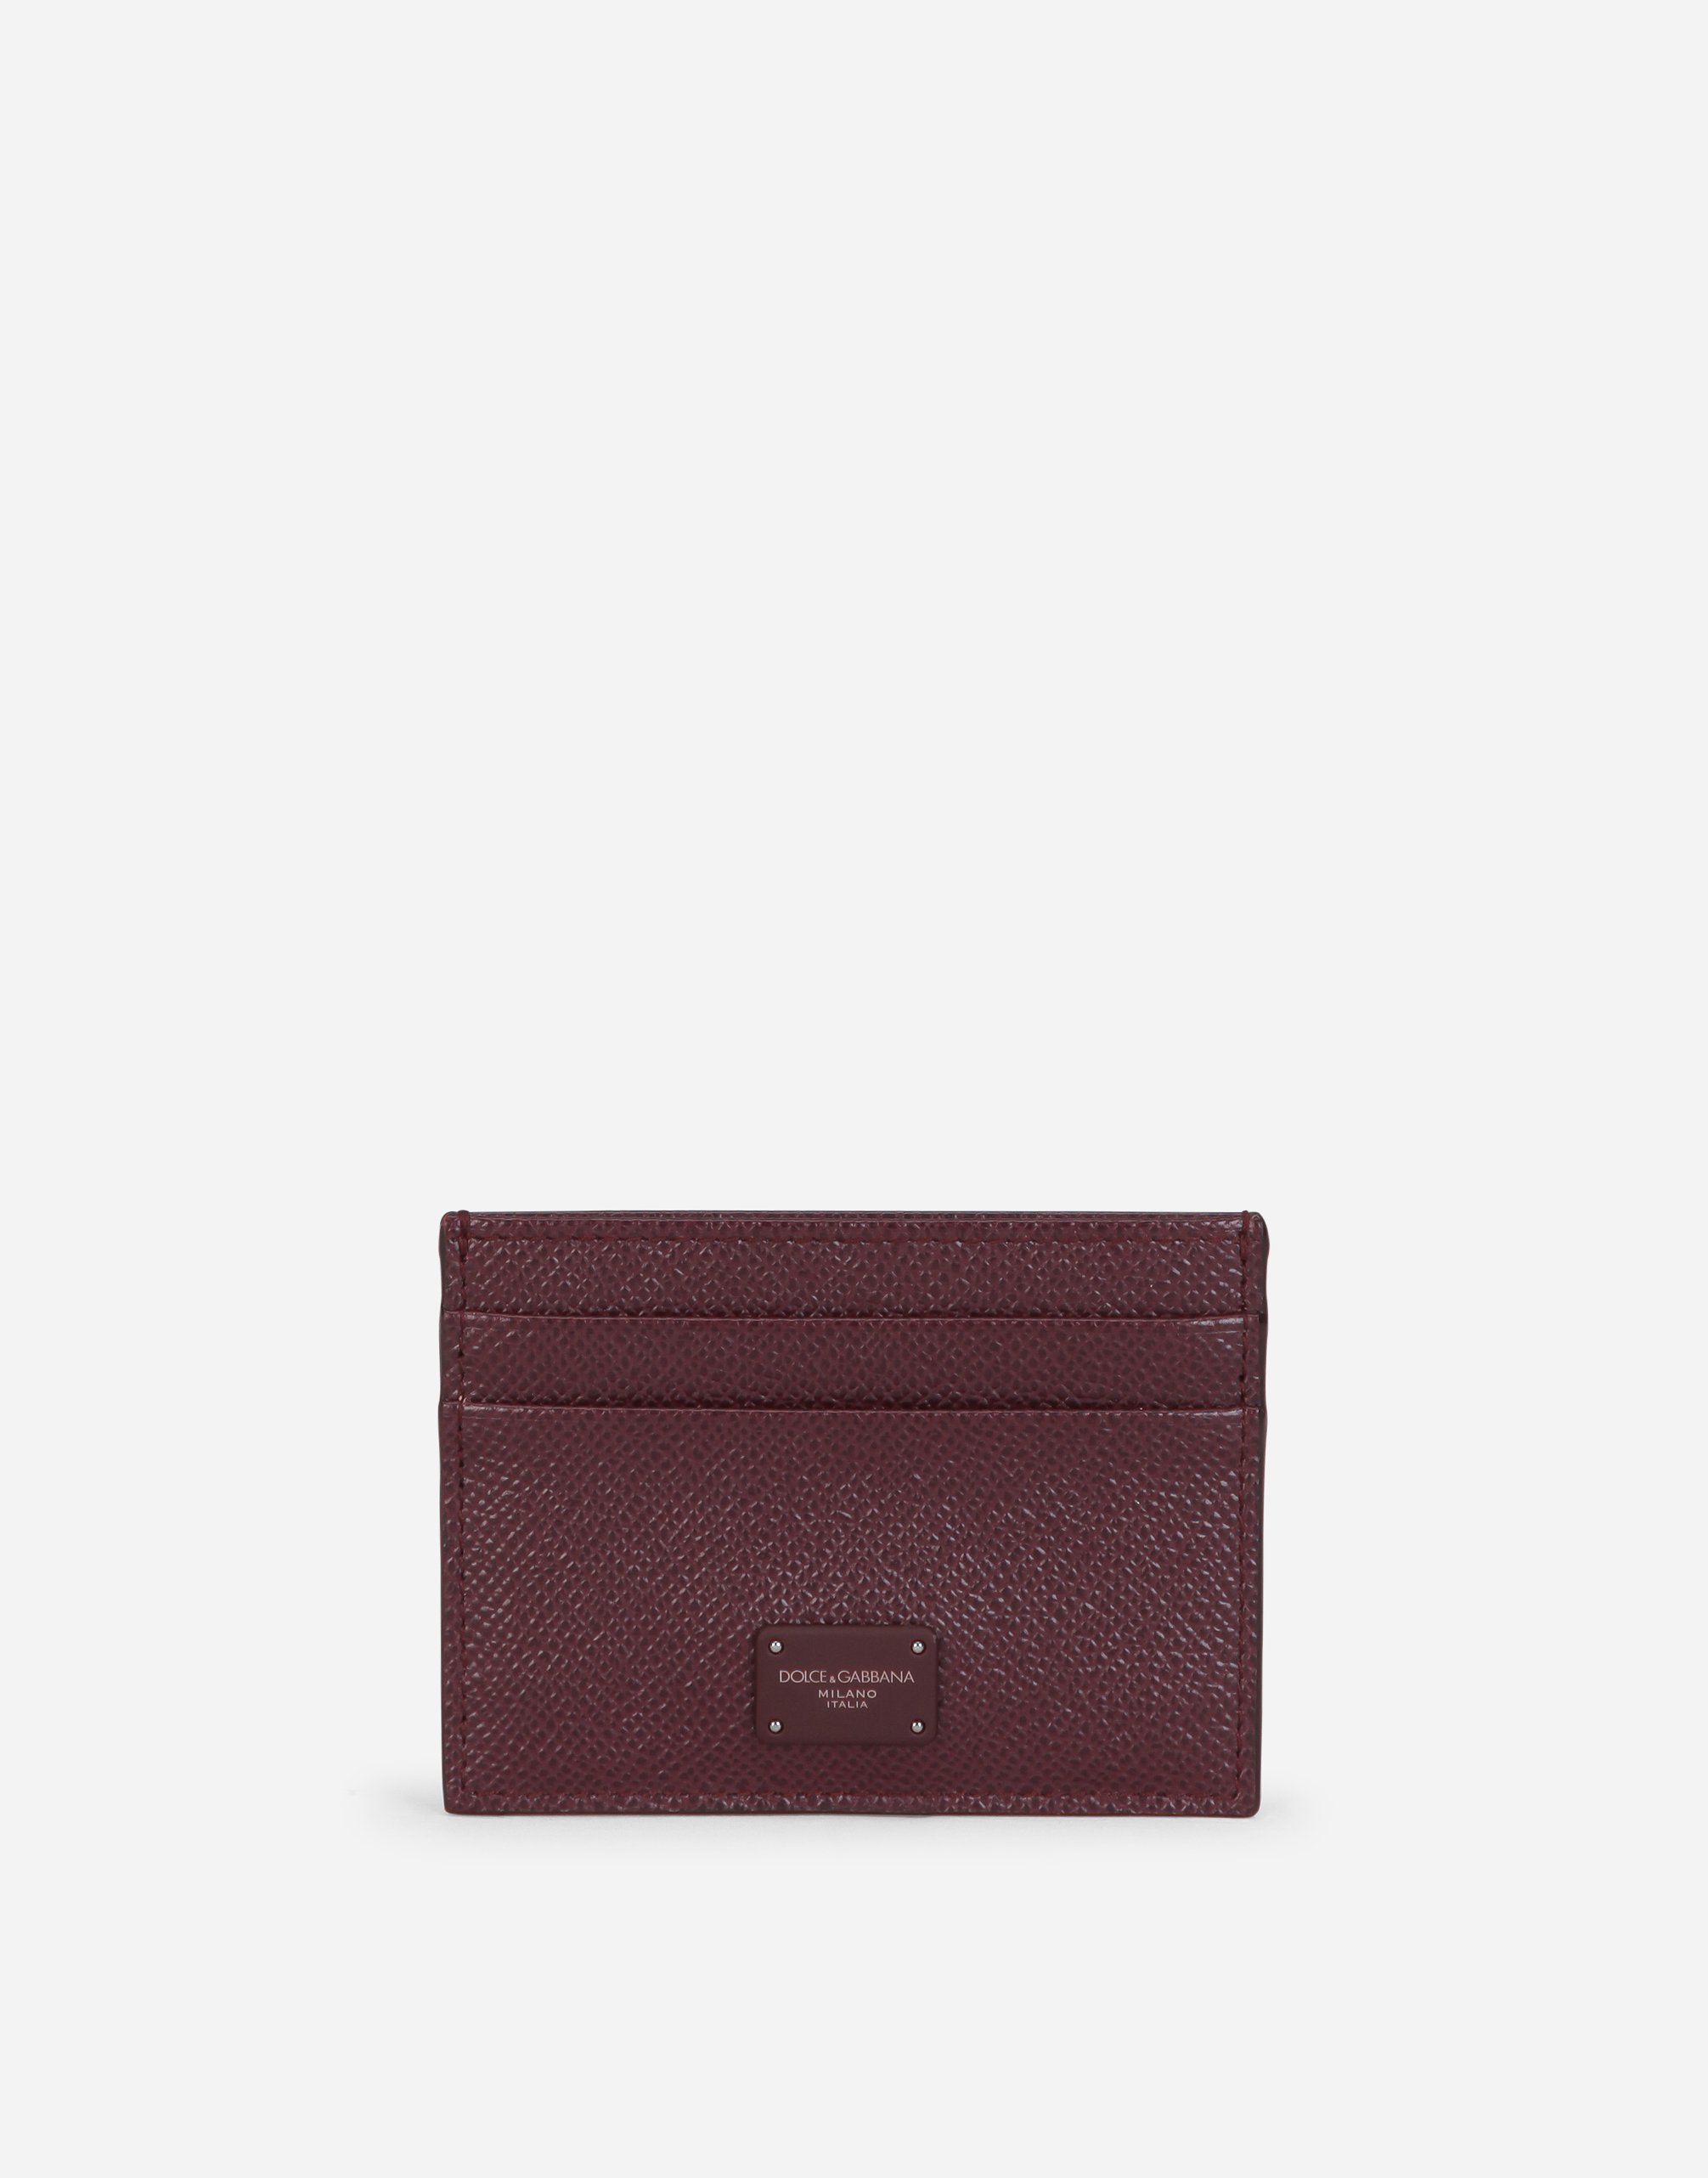 Dauphine calfskin credit card holder with logo plaque in Bordeaux